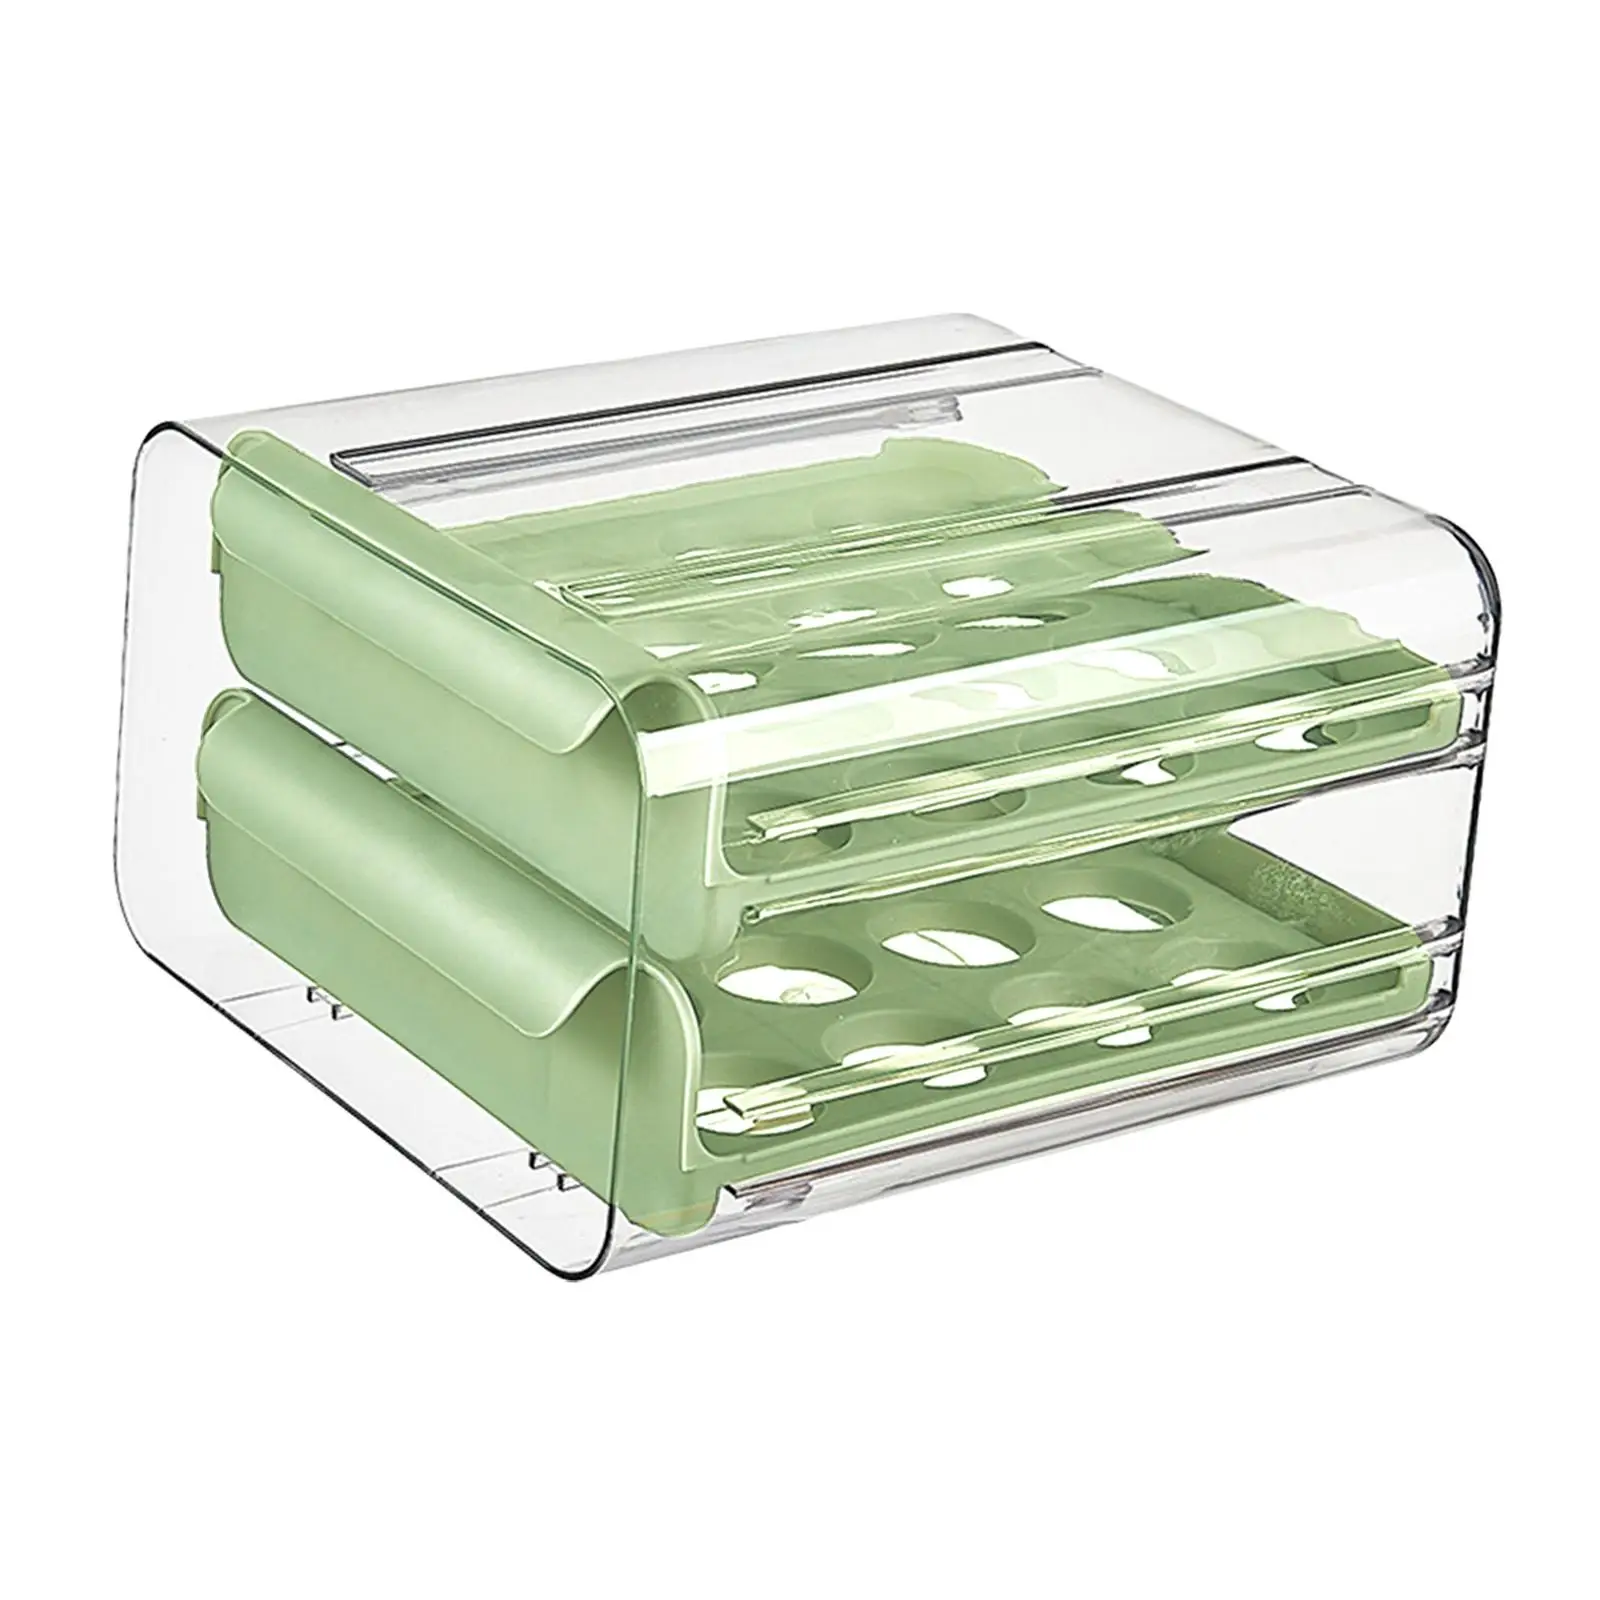 2 Layer Egg Holder Durable with Handles Space Saving Transparent Reusable Large Capacity Drawer Egg FStorage Box for Pantry